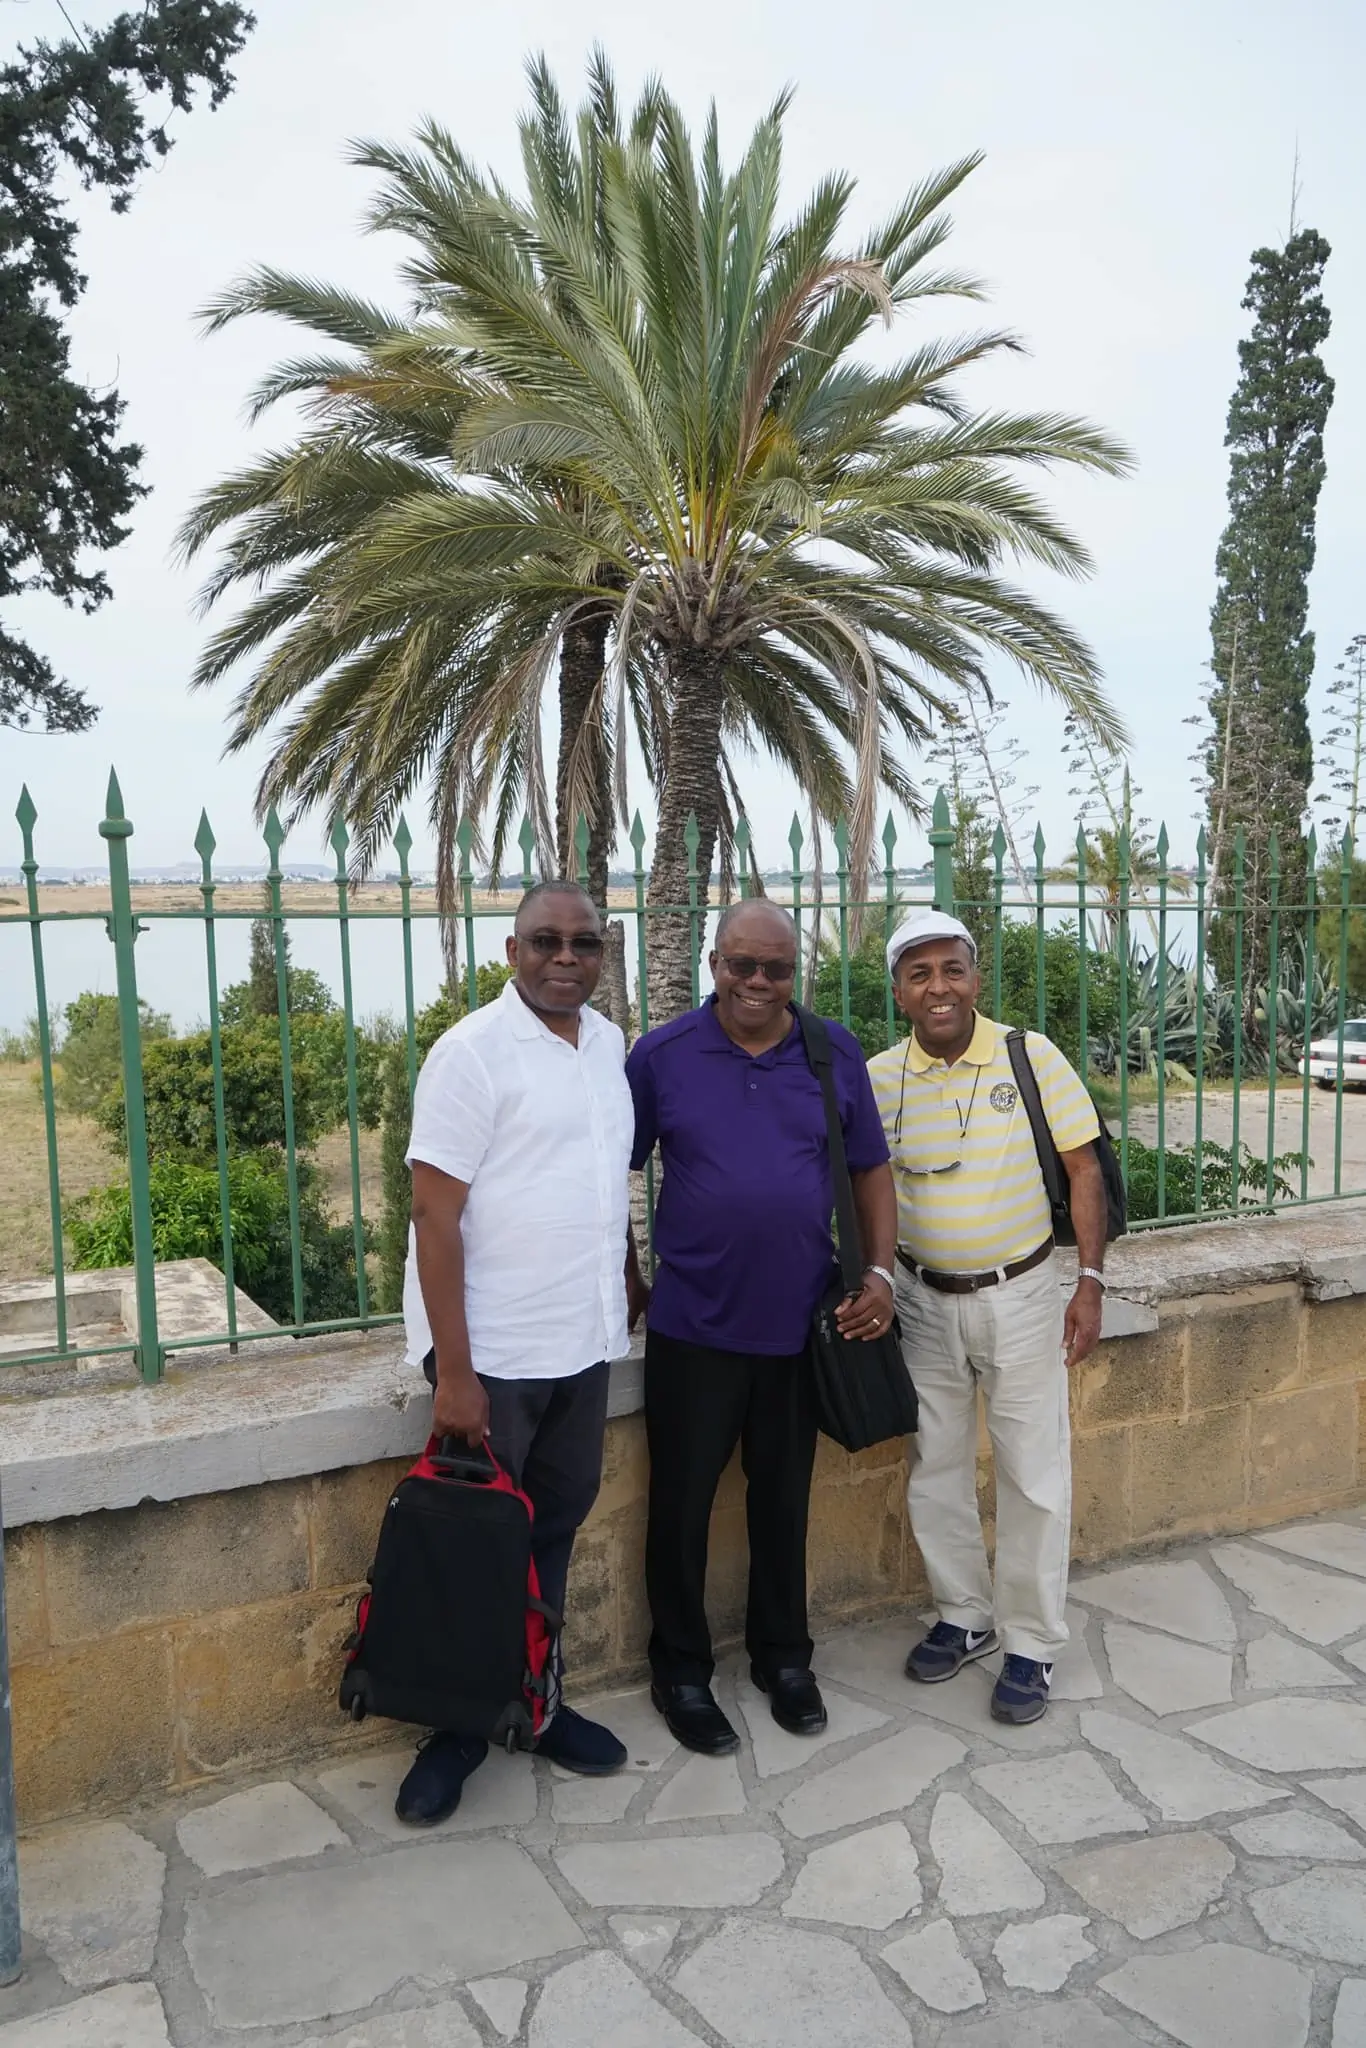 Revd Isaias Chachine, Bishop Garth Minott, and Revd Vimal Tirimana CSsR, members of ARCIC III, at the dialogue meeting in Larnaca, Cyprus